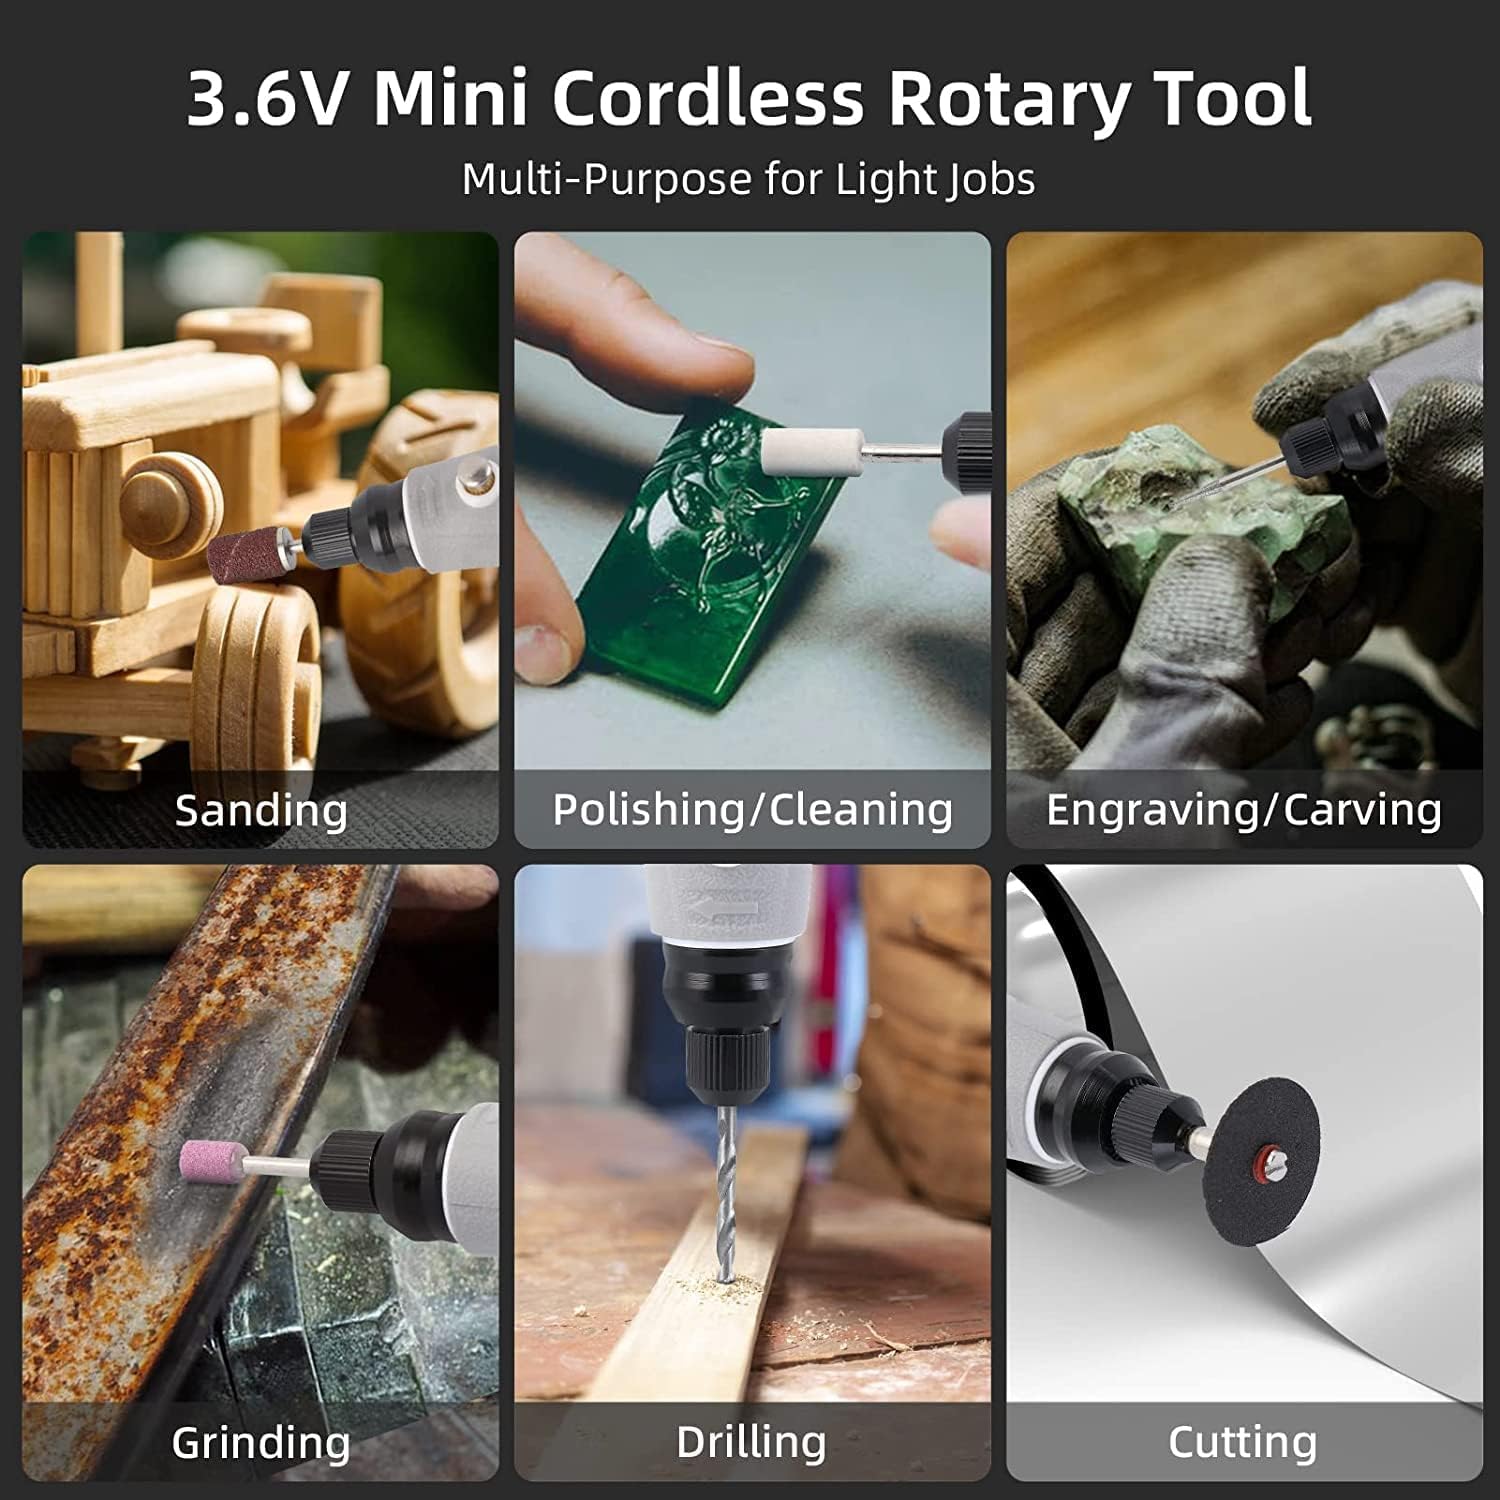 Rotary Tool Kit, 3.6V Cordless Rotary Tool with 50 Accessories, USB Rechargeable, 3 Speed Mini Rotary Tool, Multi-Purpose for Sanding, Polishing, Drilling, Engraving, DIY Small Projects